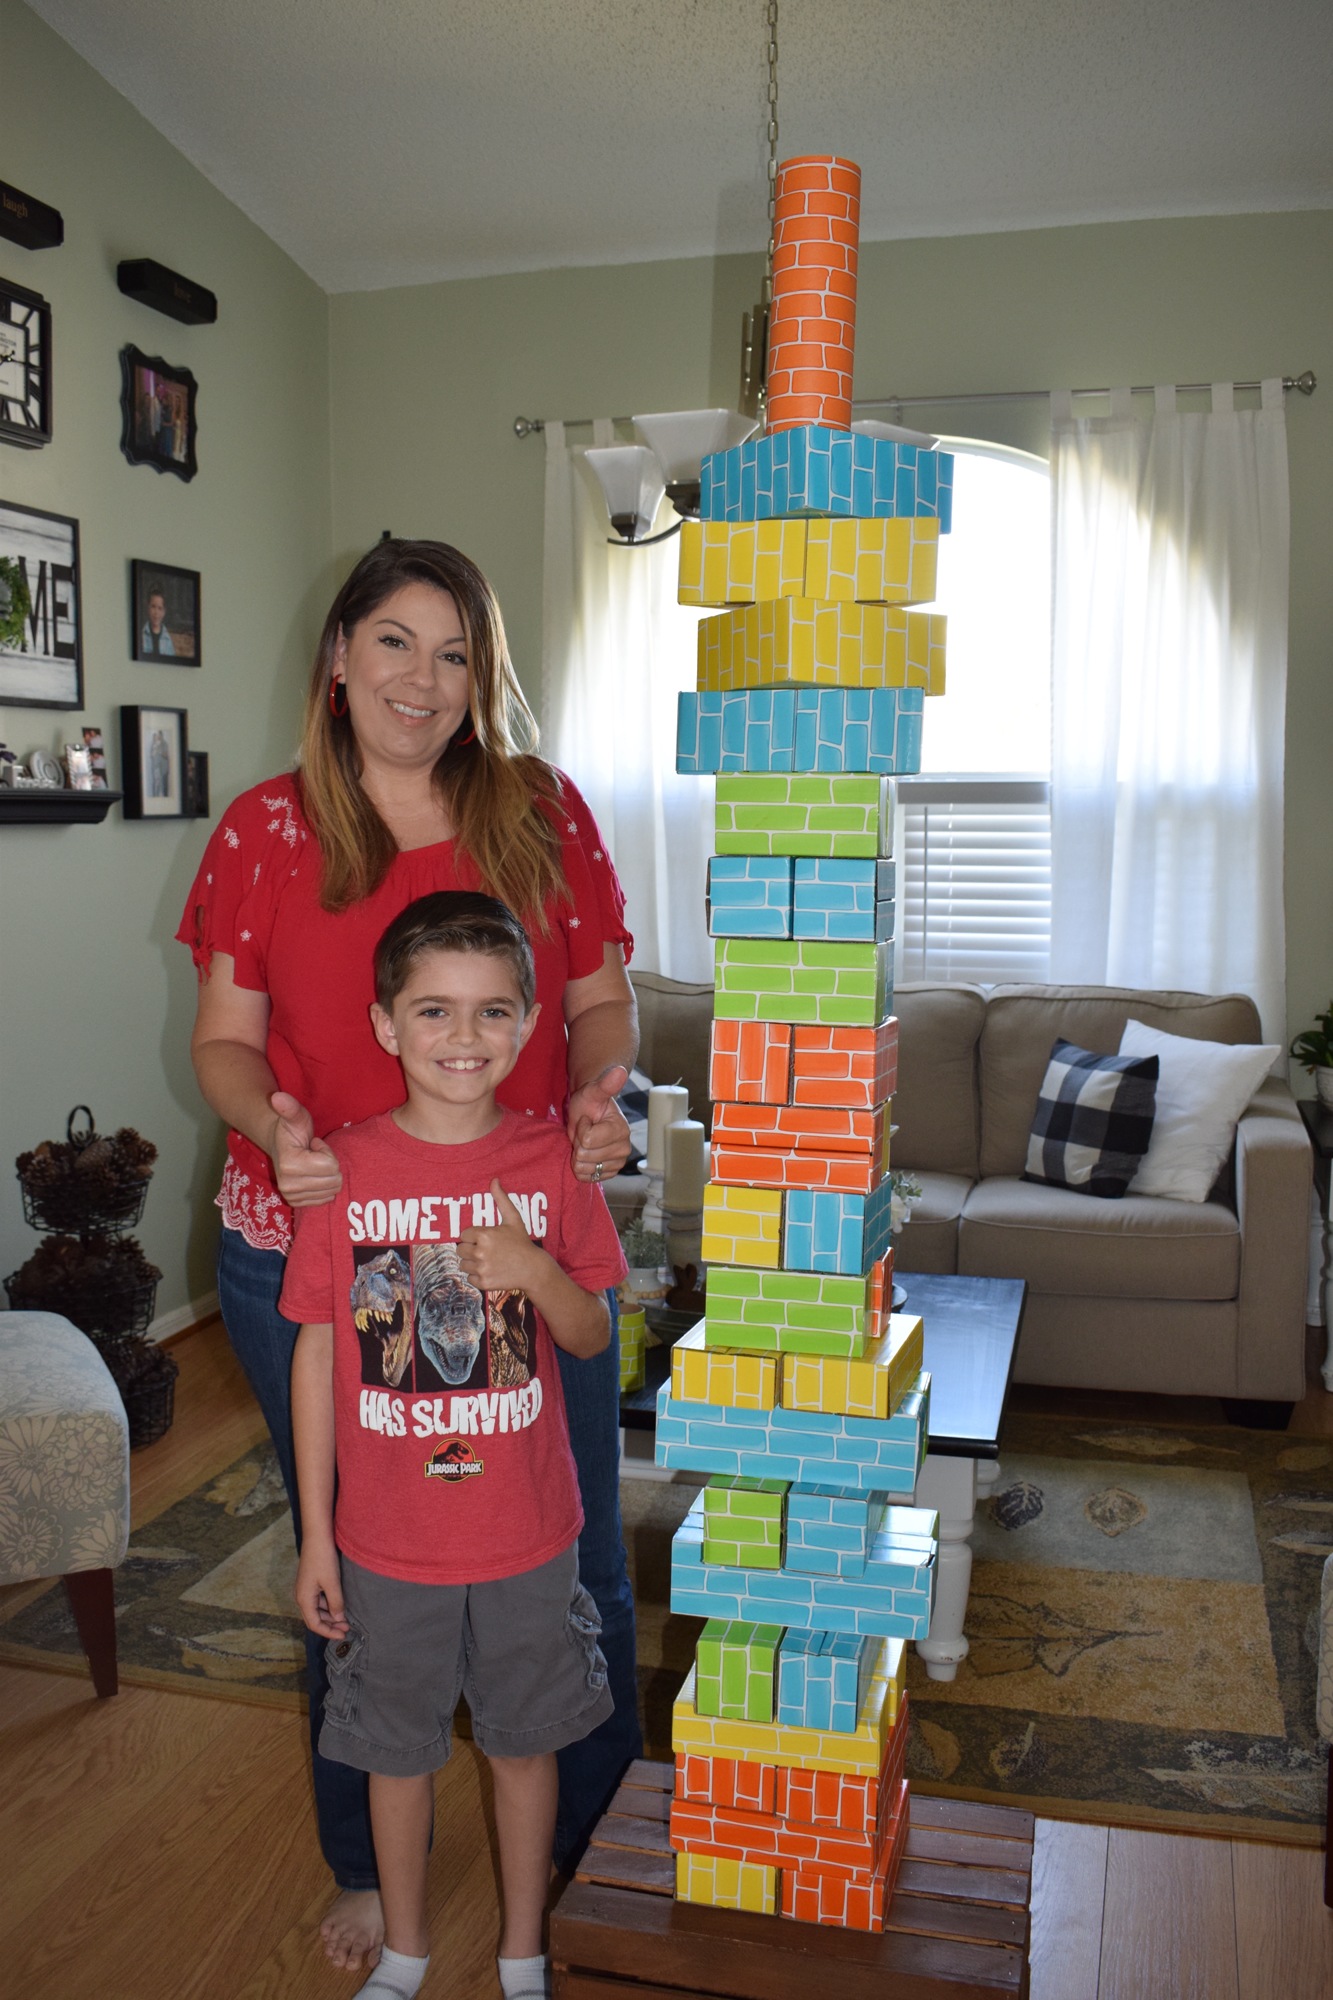 Sarah Colbath and her son Alex, who is a second grader, work together to build a tower, which is one of the activities for Tara Elementary's virtual spirit week.